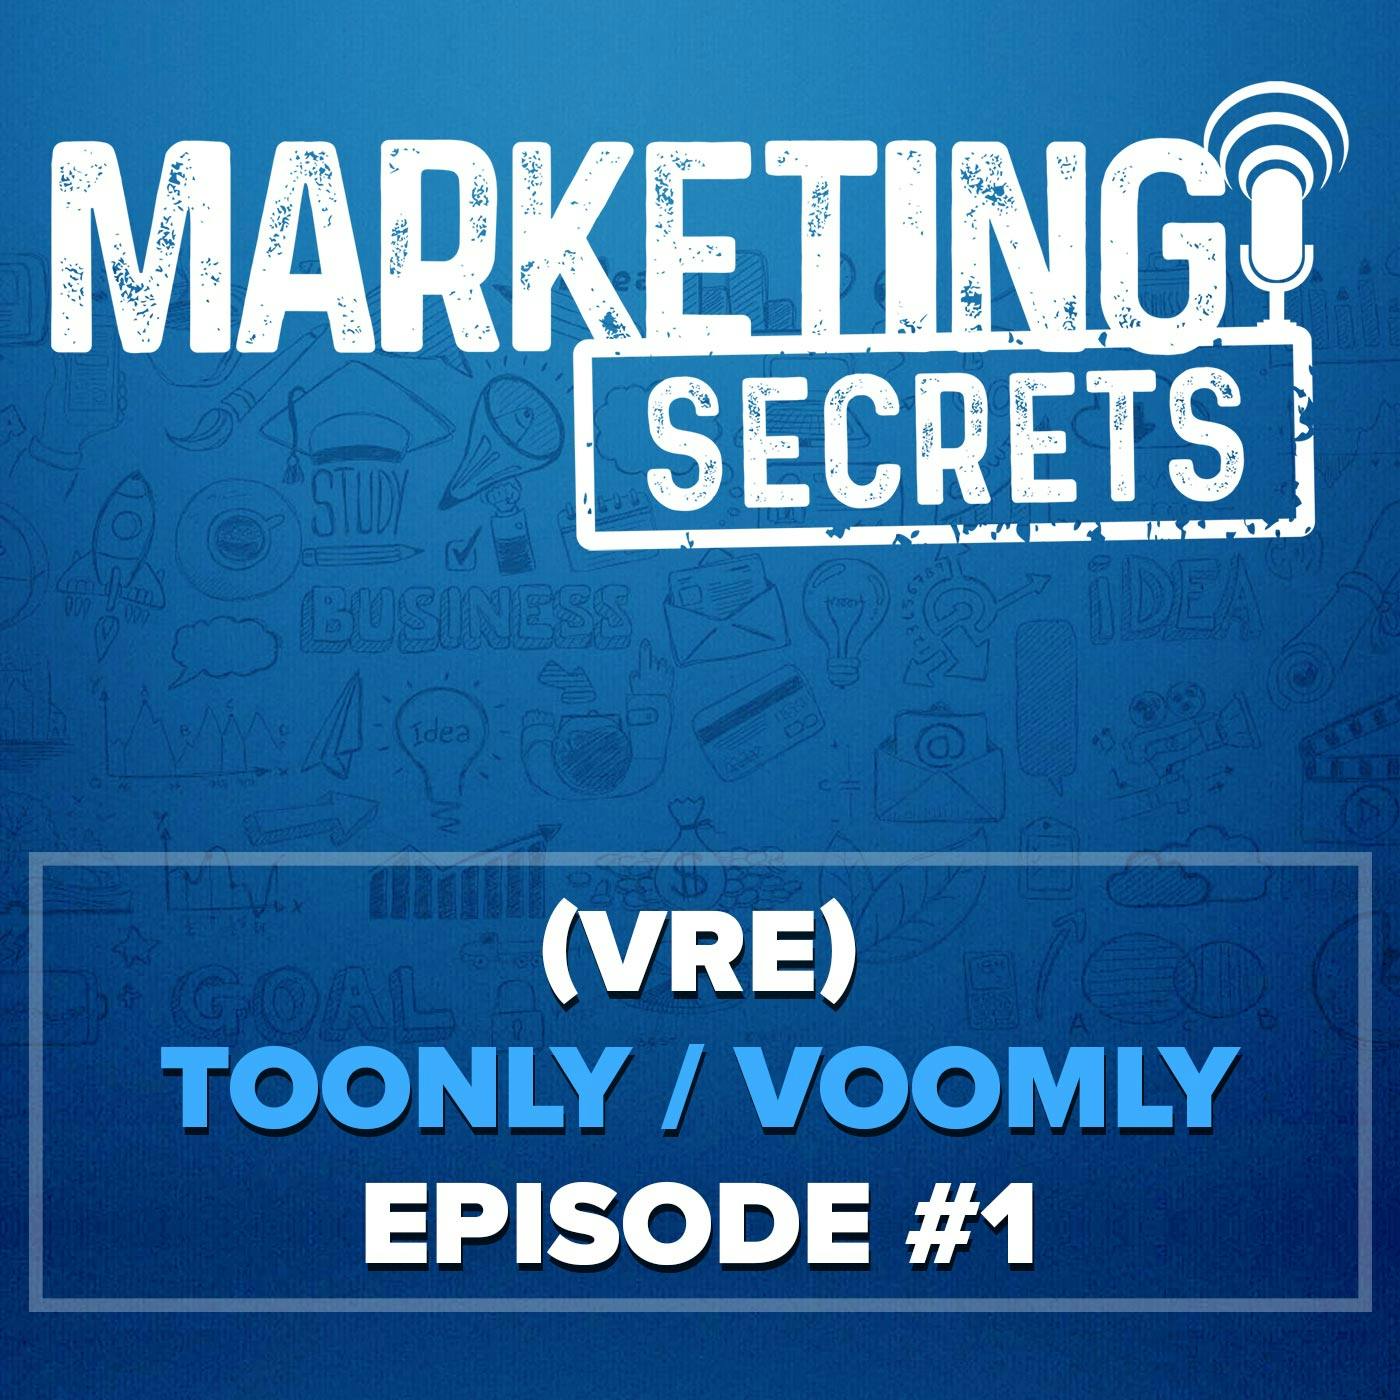 (VRE) Toonly - Voomly - Episode #1